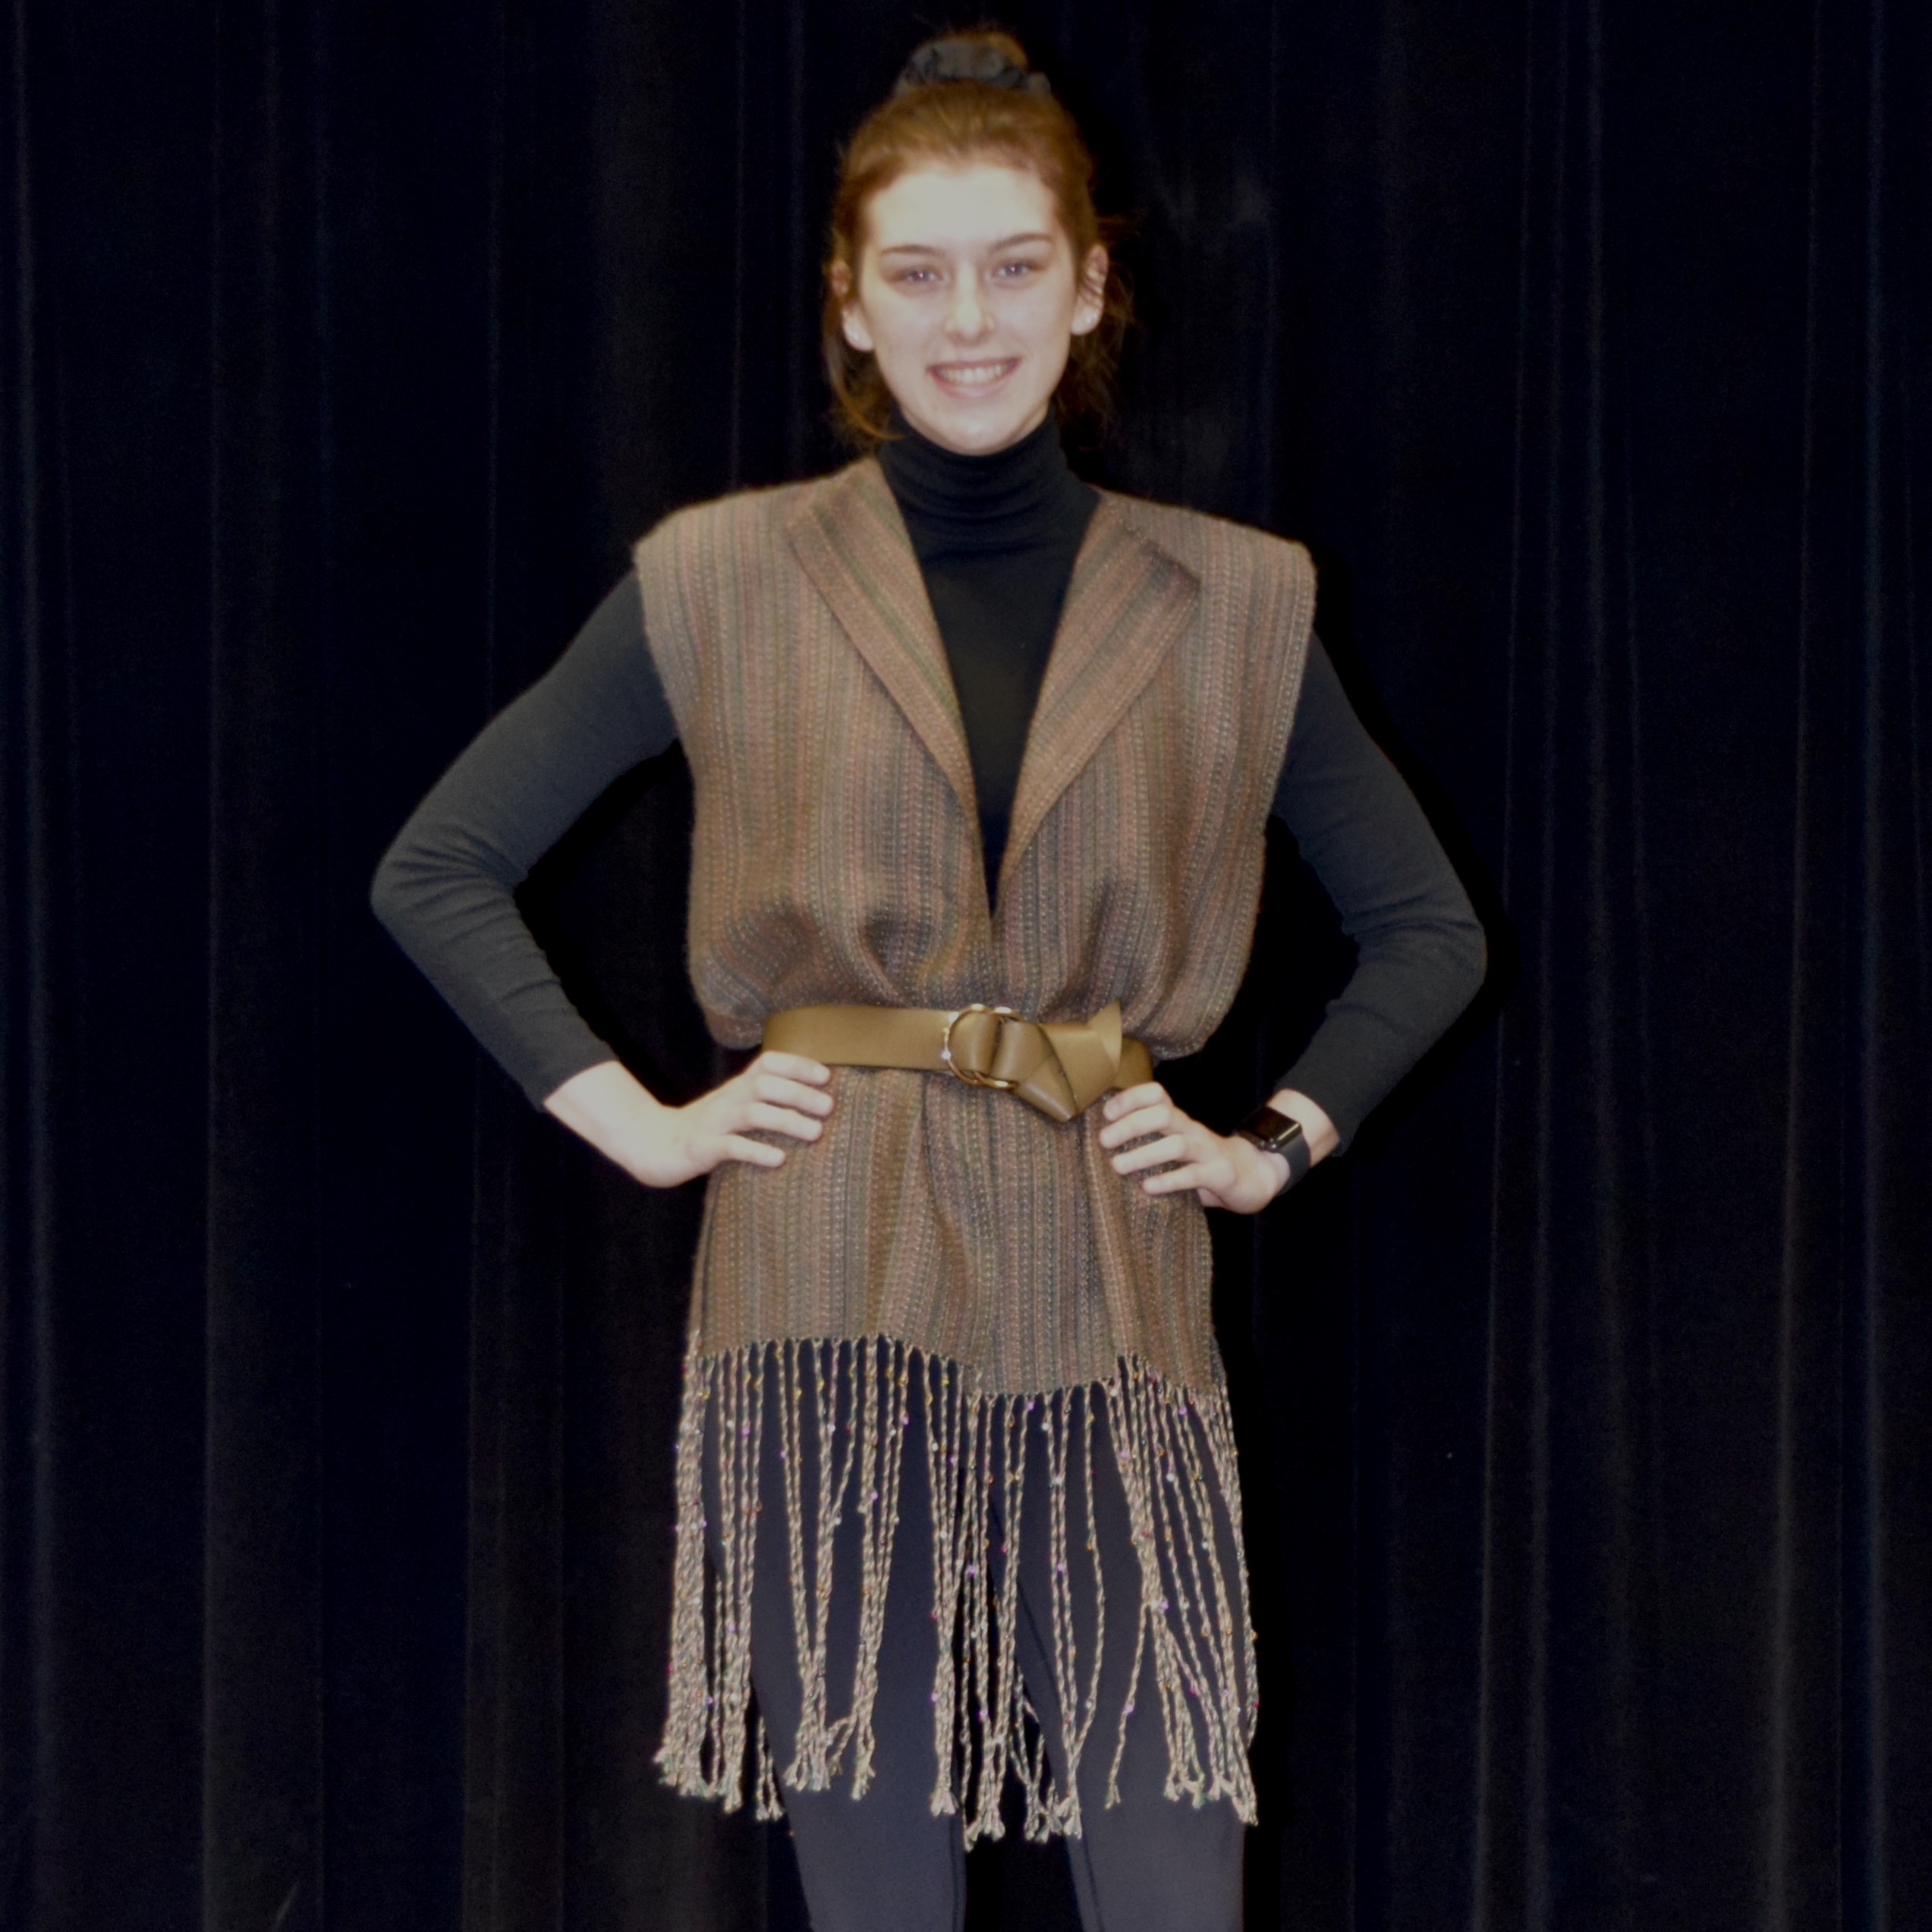 Woodlands Fringe Vest with Belt in Cotton, Silk and Alpaca - IN CONVERGENCE SEASONS OF THE SMOKIES FASHION SHOW